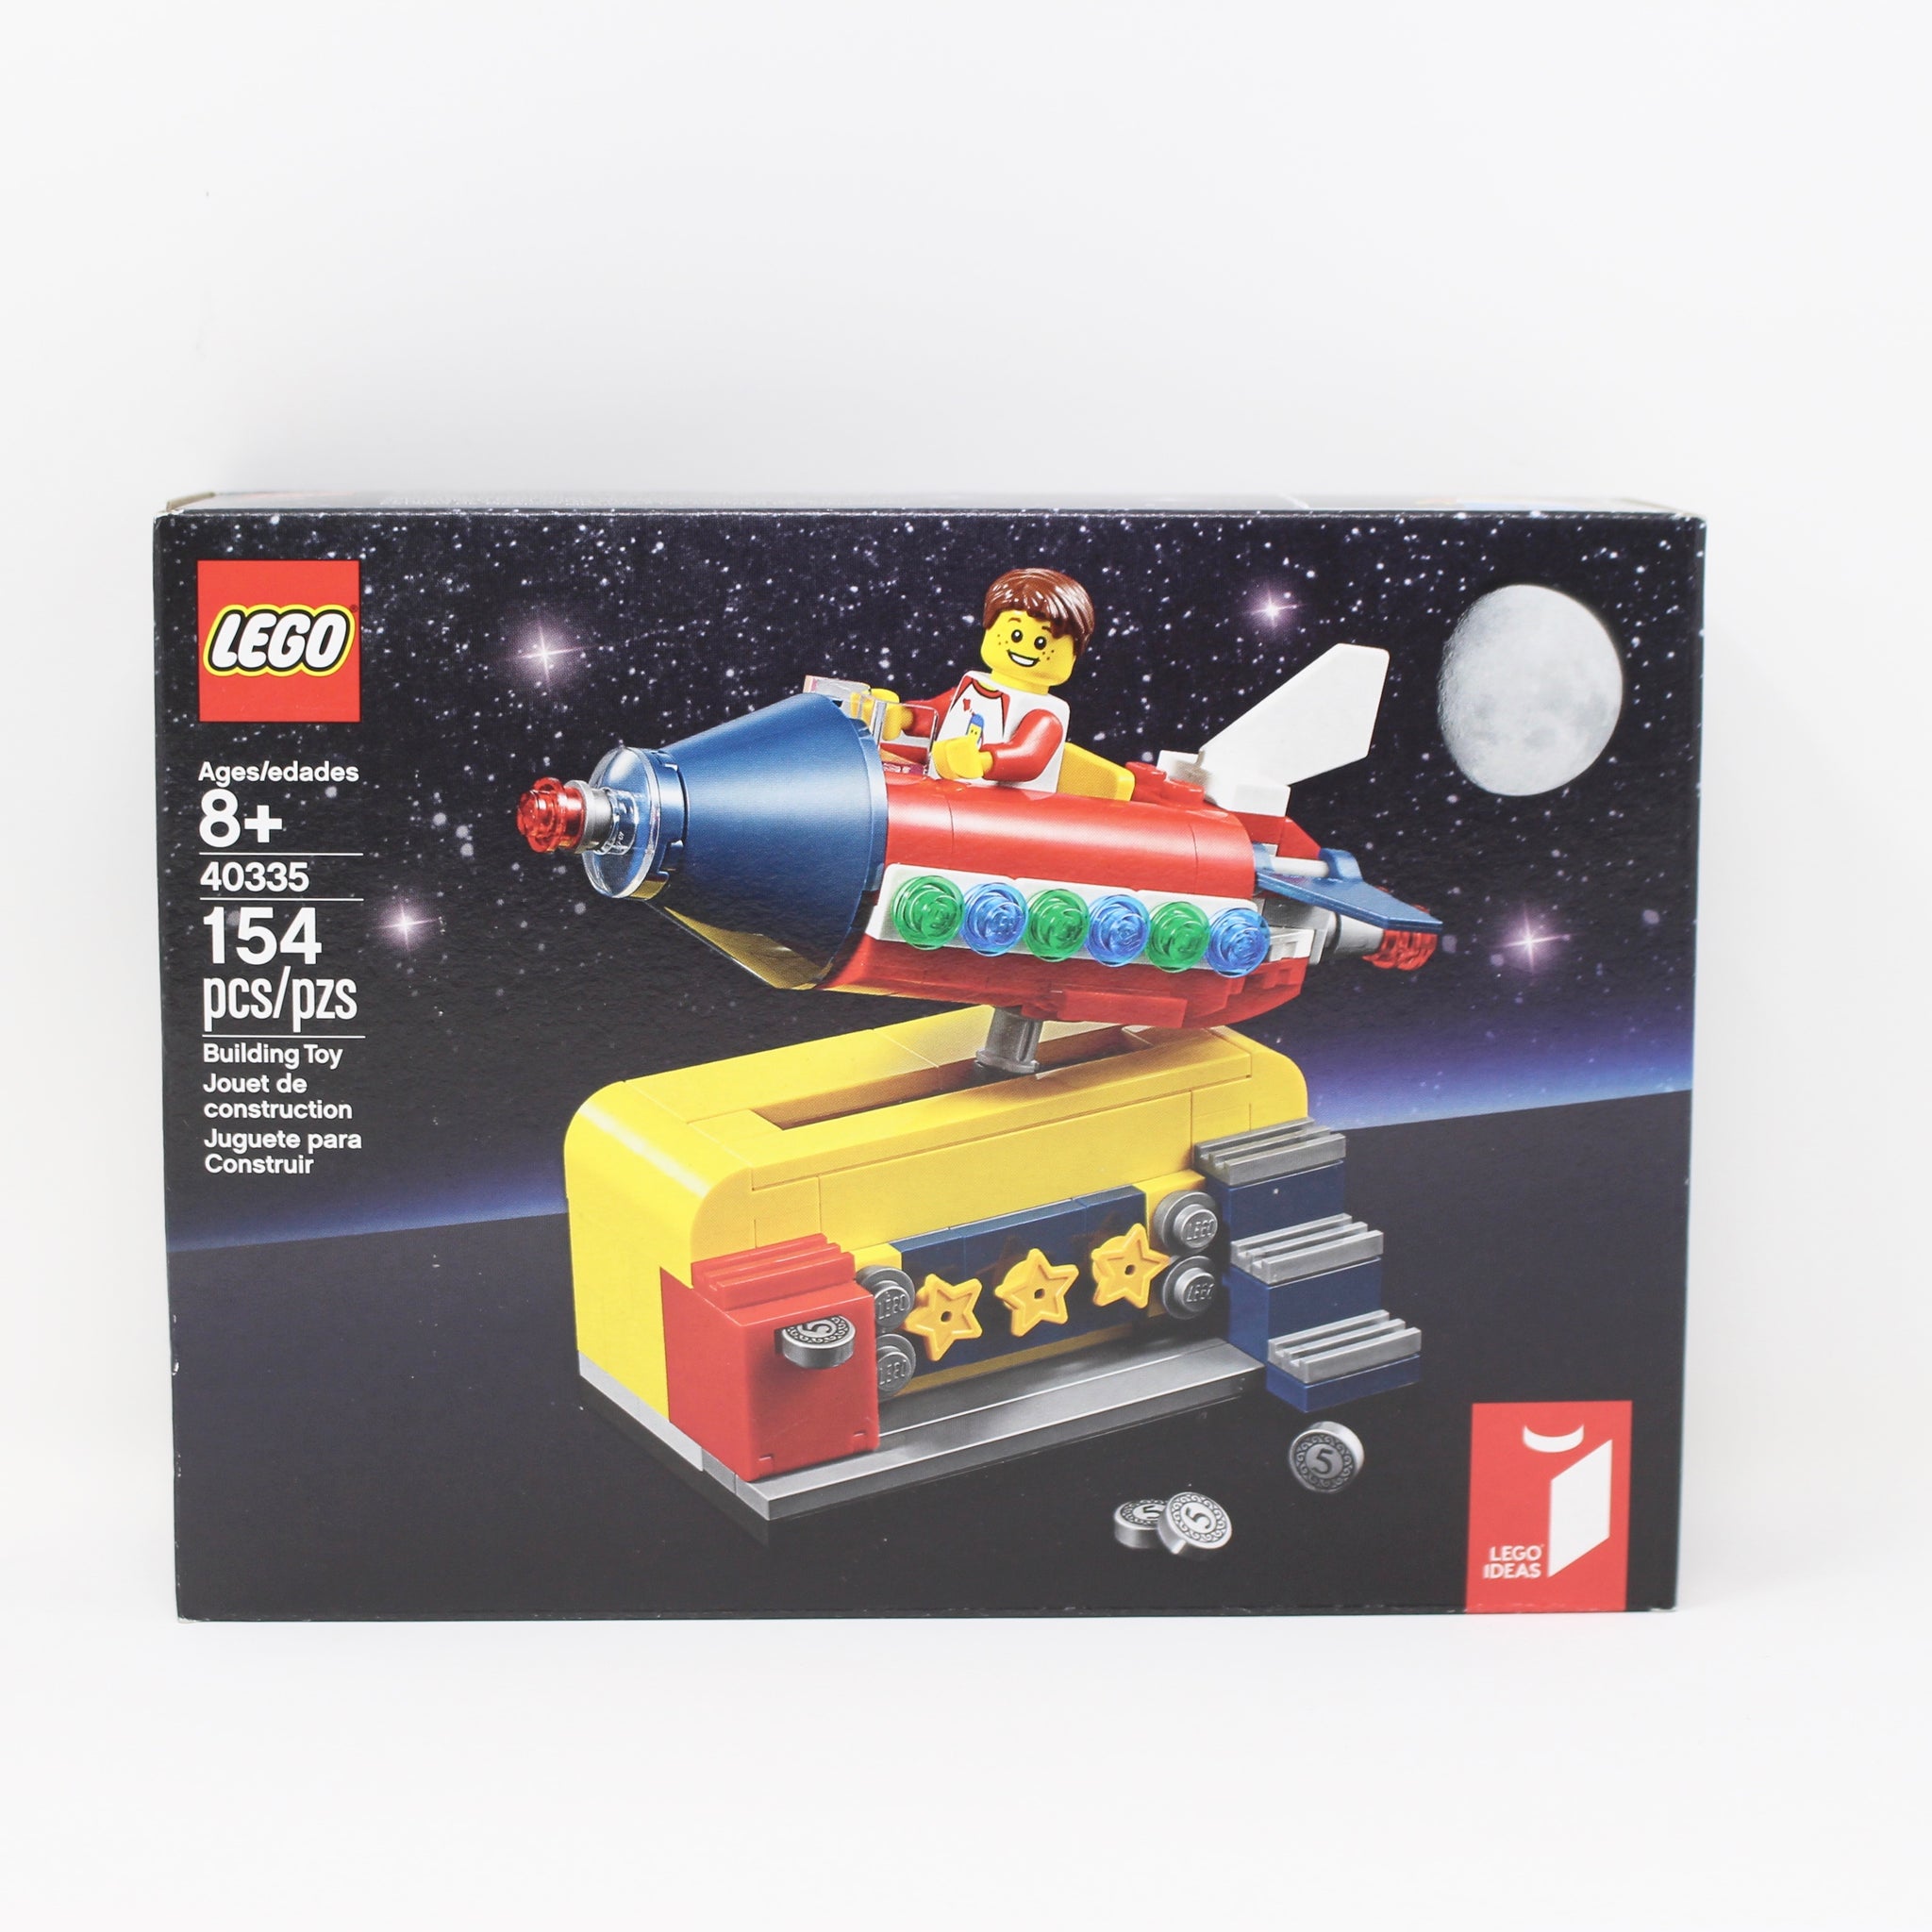 Retired 40335 LEGO Ideas Space Ride